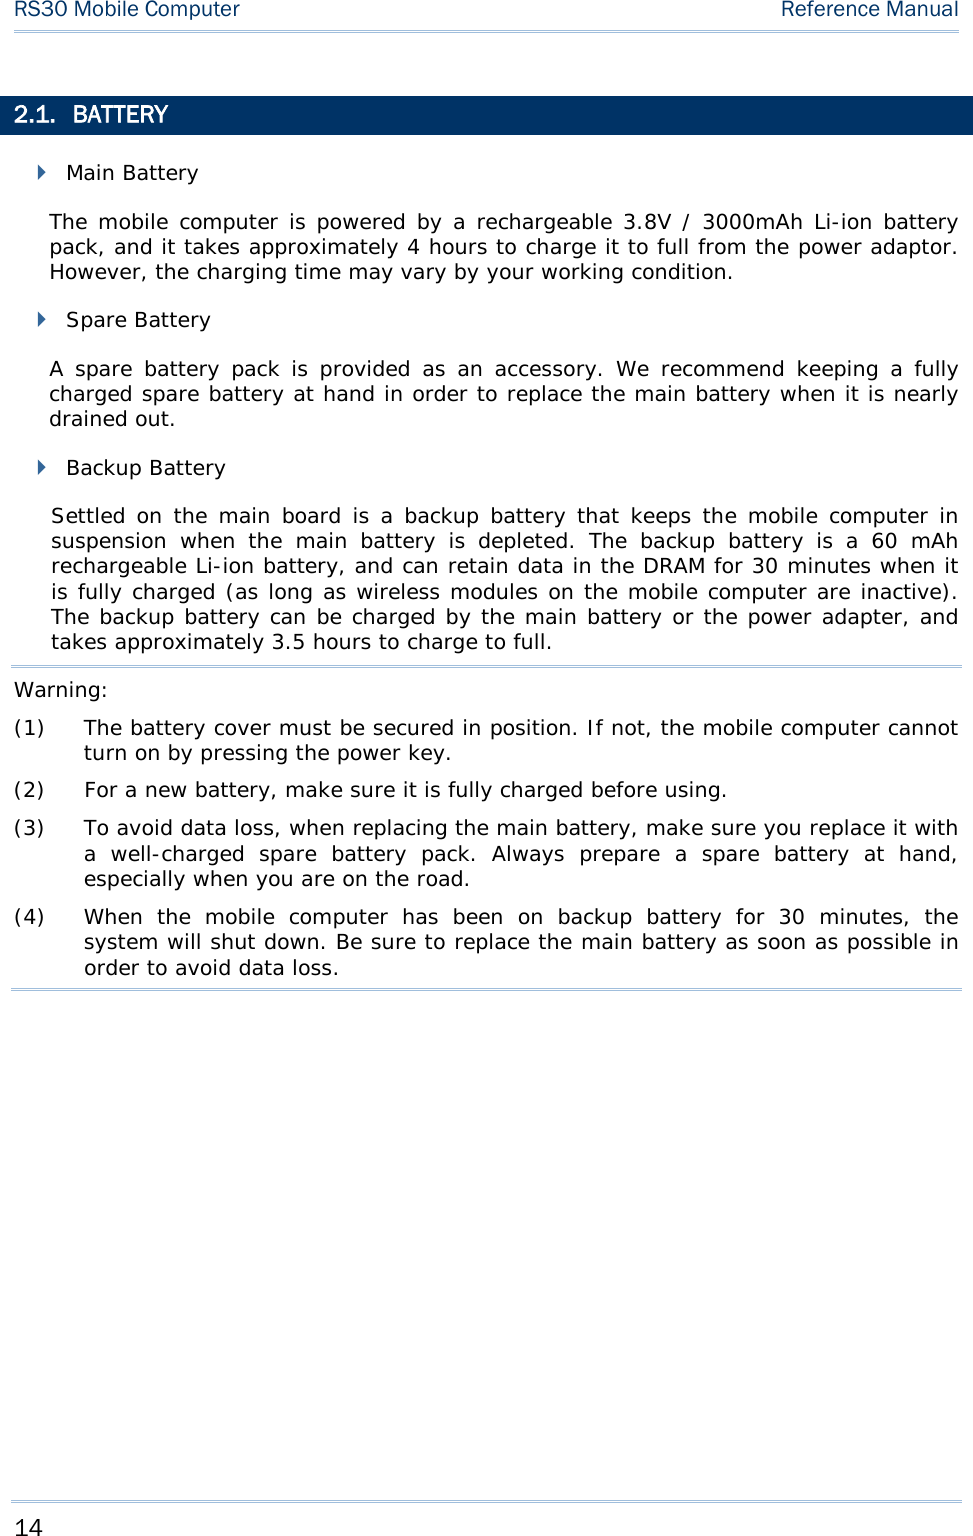 RS30 Mobile Computer    Reference Manual  2.1. BATTERY  Main Battery The mobile computer is powered by a rechargeable 3.8V / 3000mAh Li-ion battery pack, and it takes approximately 4 hours to charge it to full from the power adaptor. However, the charging time may vary by your working condition.  Spare Battery A spare battery pack is provided as an accessory. We recommend keeping a fully charged spare battery at hand in order to replace the main battery when it is nearly drained out.  Backup Battery Settled on the main board is a backup battery that keeps the mobile computer in suspension when the main battery is depleted.  The backup battery is a 60 mAh rechargeable Li-ion battery, and can retain data in the DRAM for 30 minutes when it is fully charged (as long as wireless modules on the mobile computer are inactive). The backup battery can be charged by the main battery or the power adapter, and takes approximately 3.5 hours to charge to full.  Warning: (1) The battery cover must be secured in position. If not, the mobile computer cannot turn on by pressing the power key. (2) For a new battery, make sure it is fully charged before using.  (3) To avoid data loss, when replacing the main battery, make sure you replace it with a well-charged spare battery pack. Always prepare a spare battery  at hand, especially when you are on the road. (4) When the mobile computer has been on backup battery for 30 minutes, the system will shut down. Be sure to replace the main battery as soon as possible in order to avoid data loss.   14 